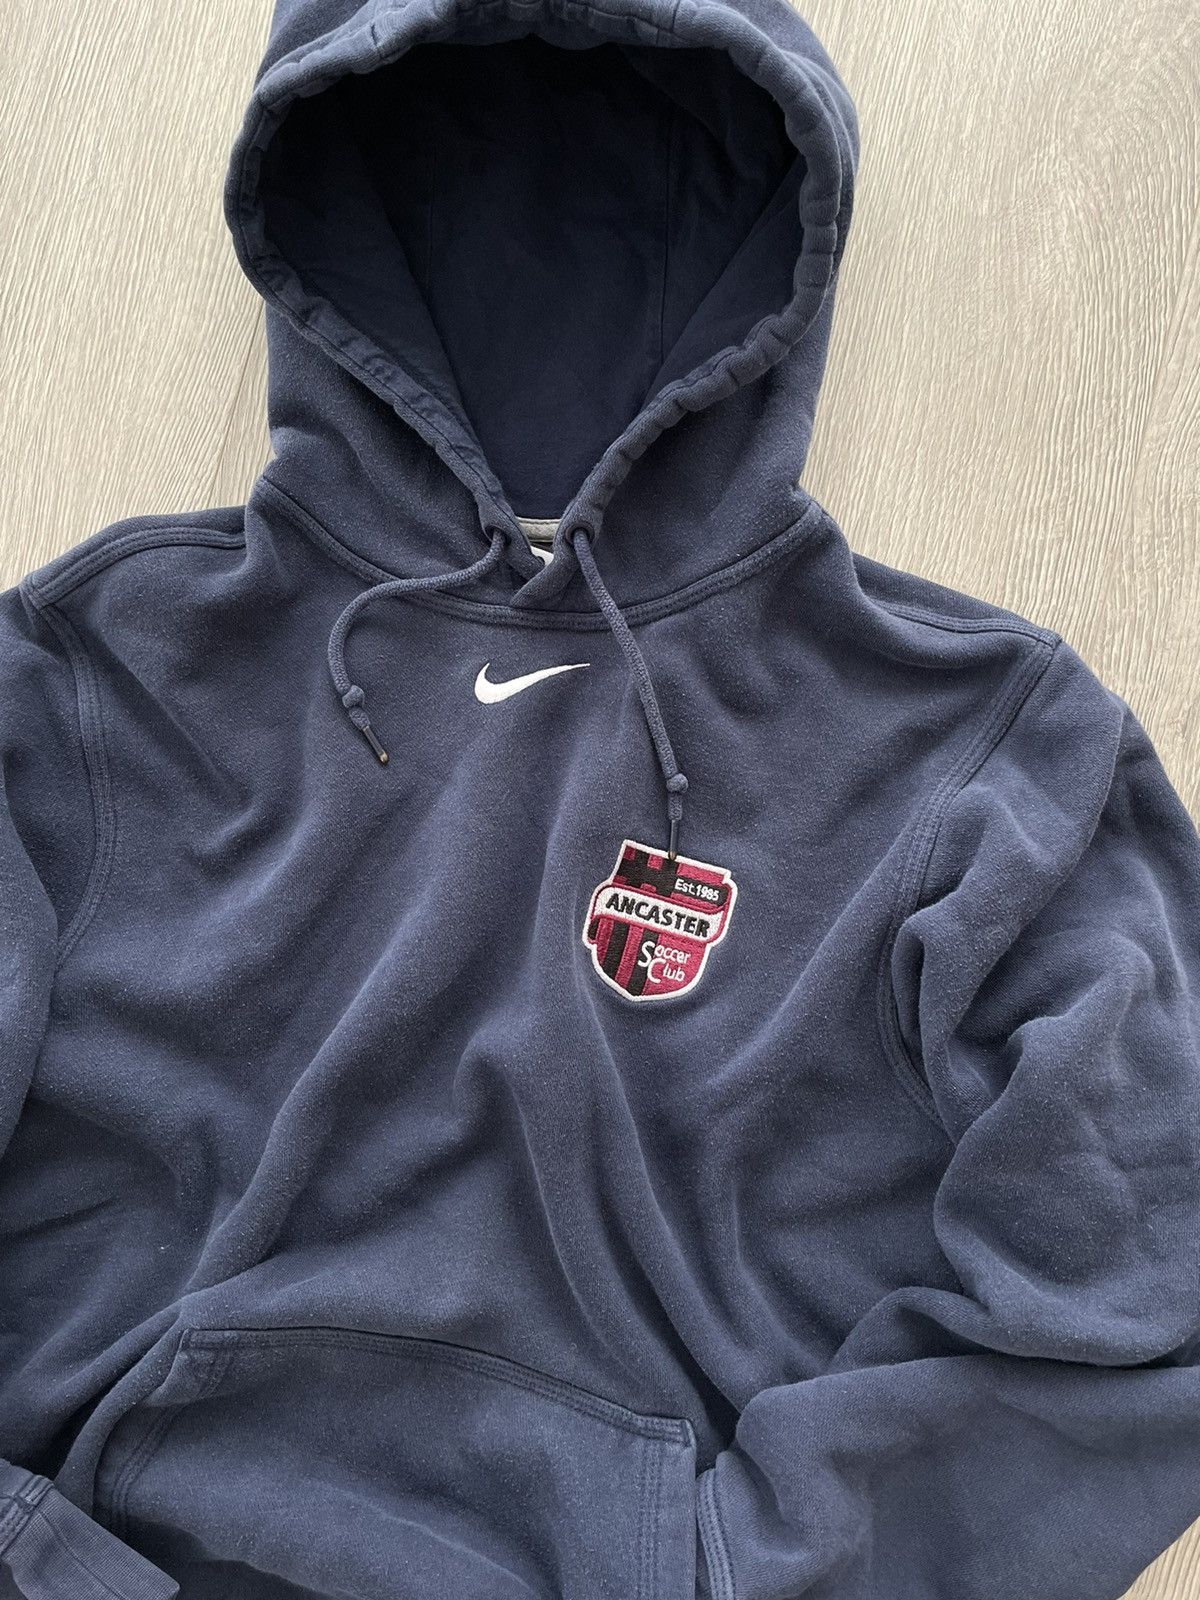 Nike STEAL Nike Middle Swoosh Check Hoodie Navy Blue 90s Travis Size US S / EU 44-46 / 1 - 2 Preview